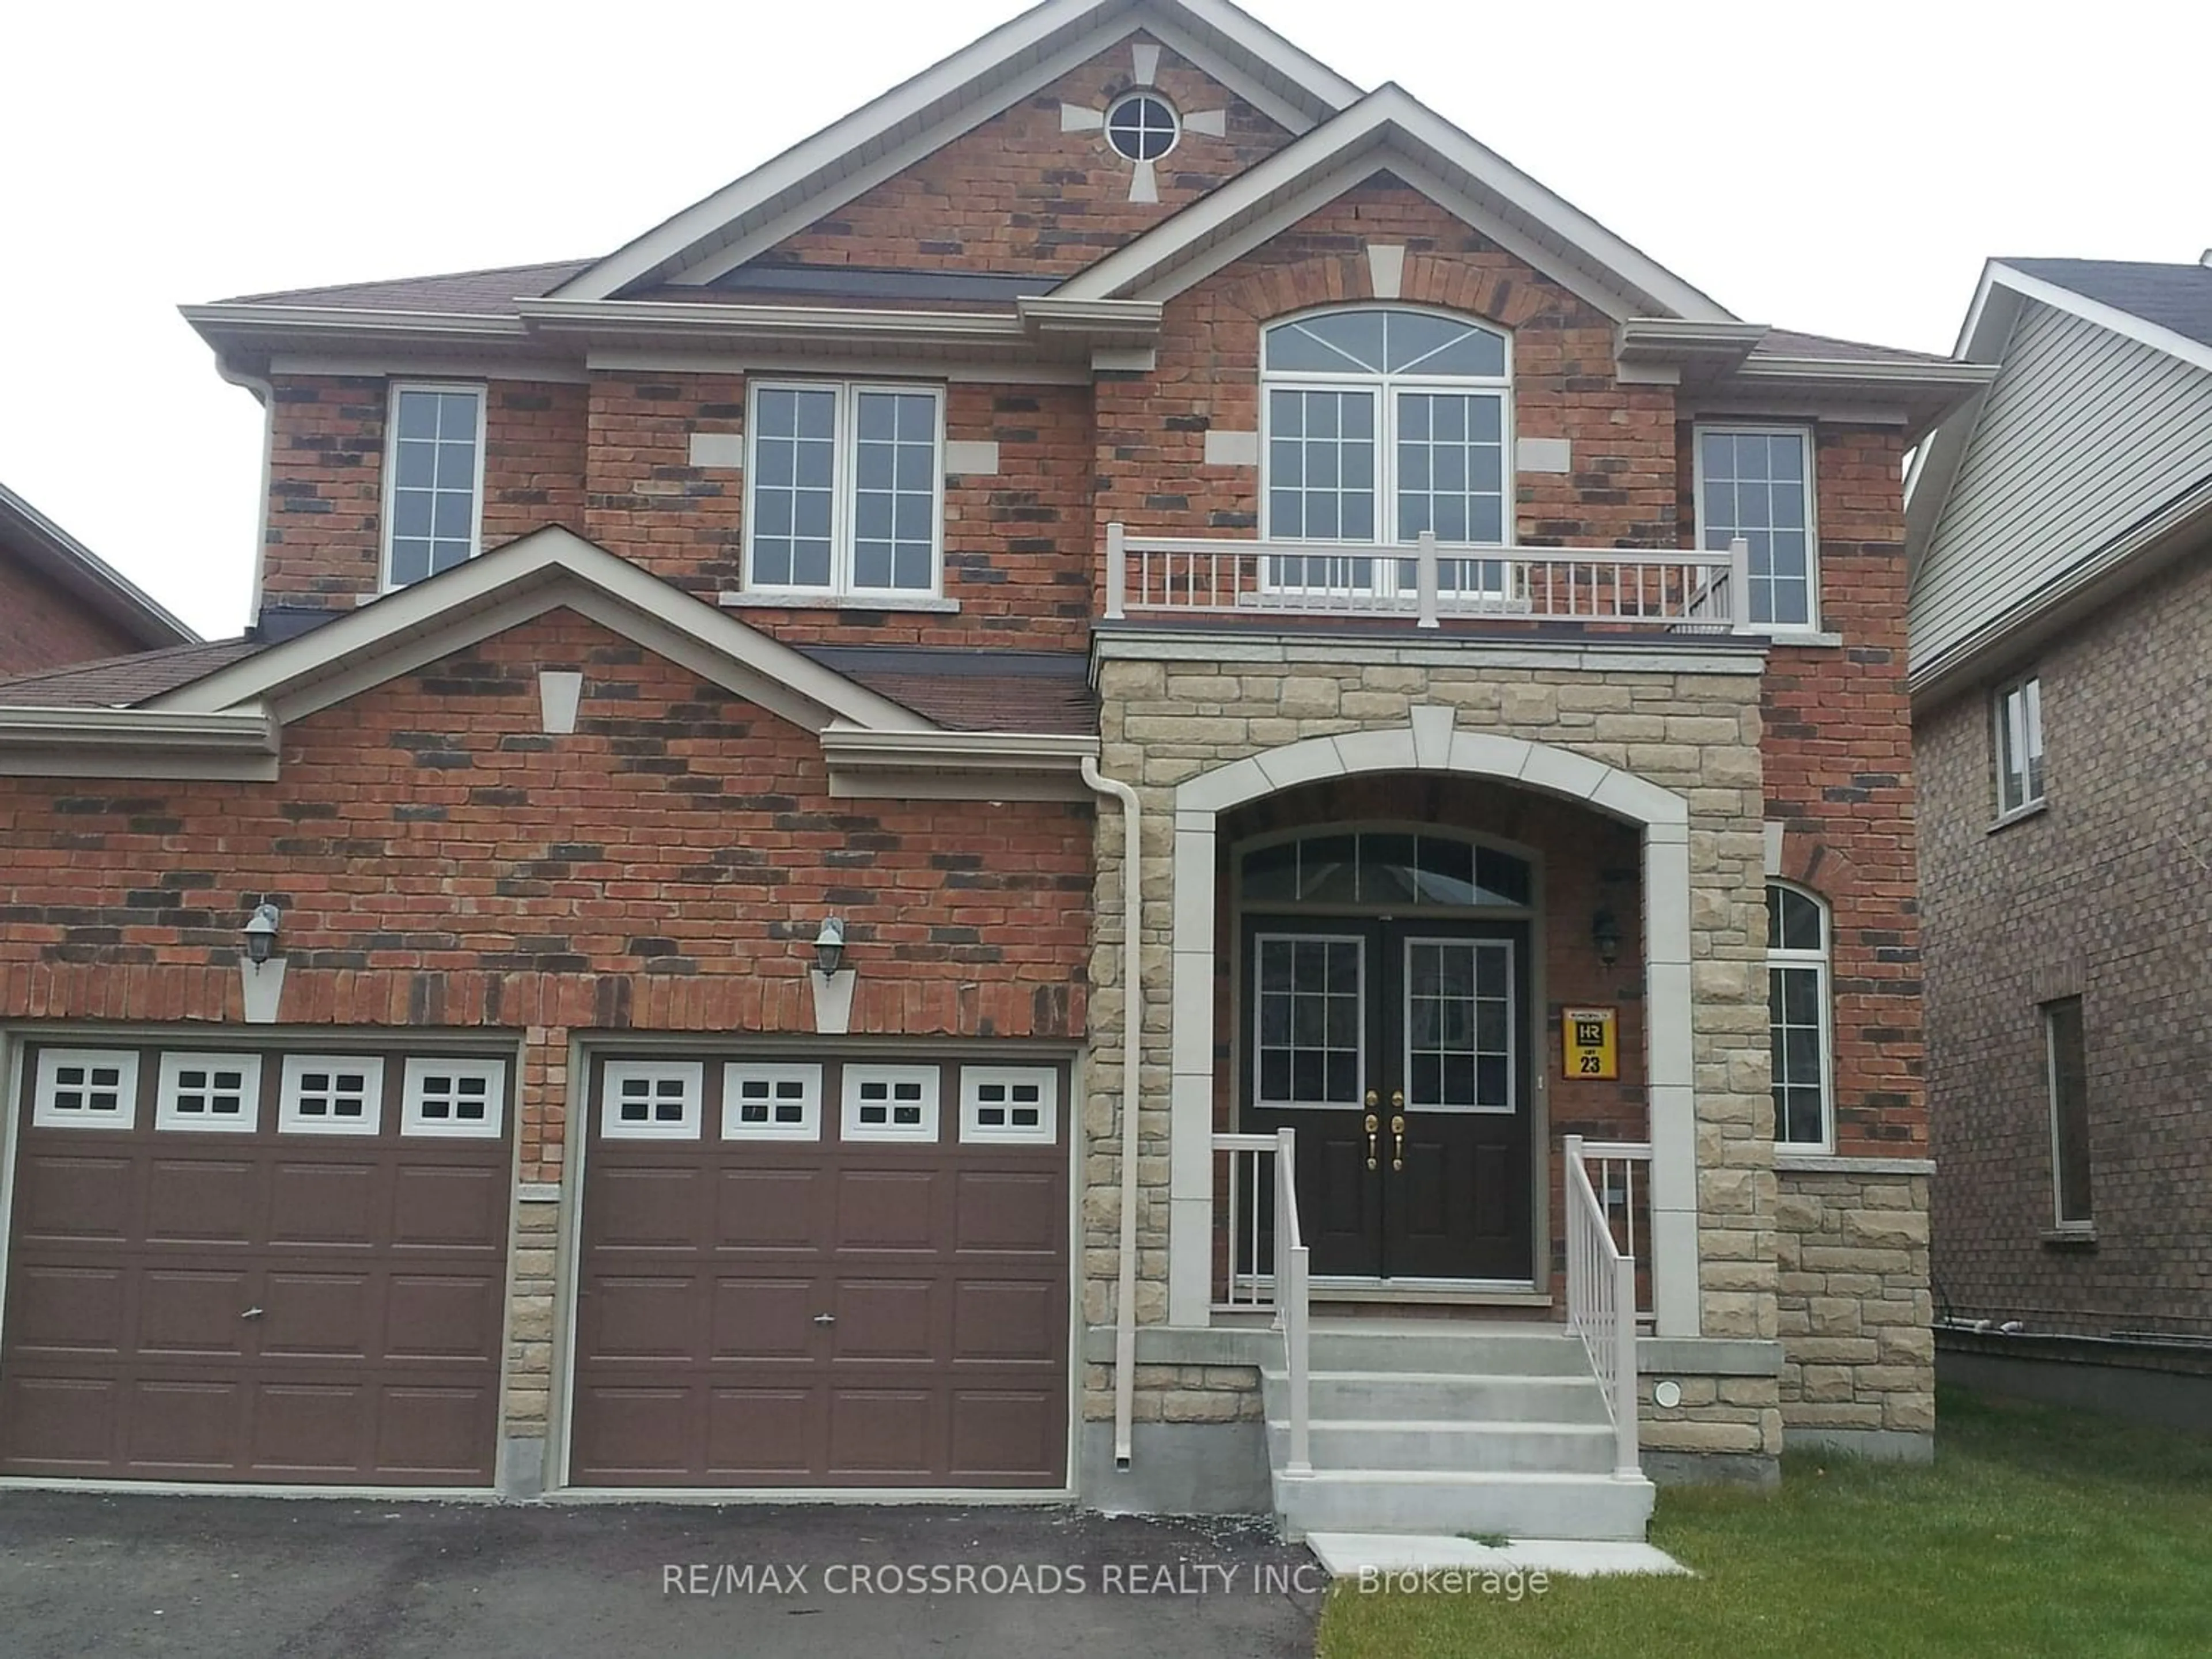 Home with brick exterior material for 73 Eakin Mill Rd, Markham Ontario L6E 1N9